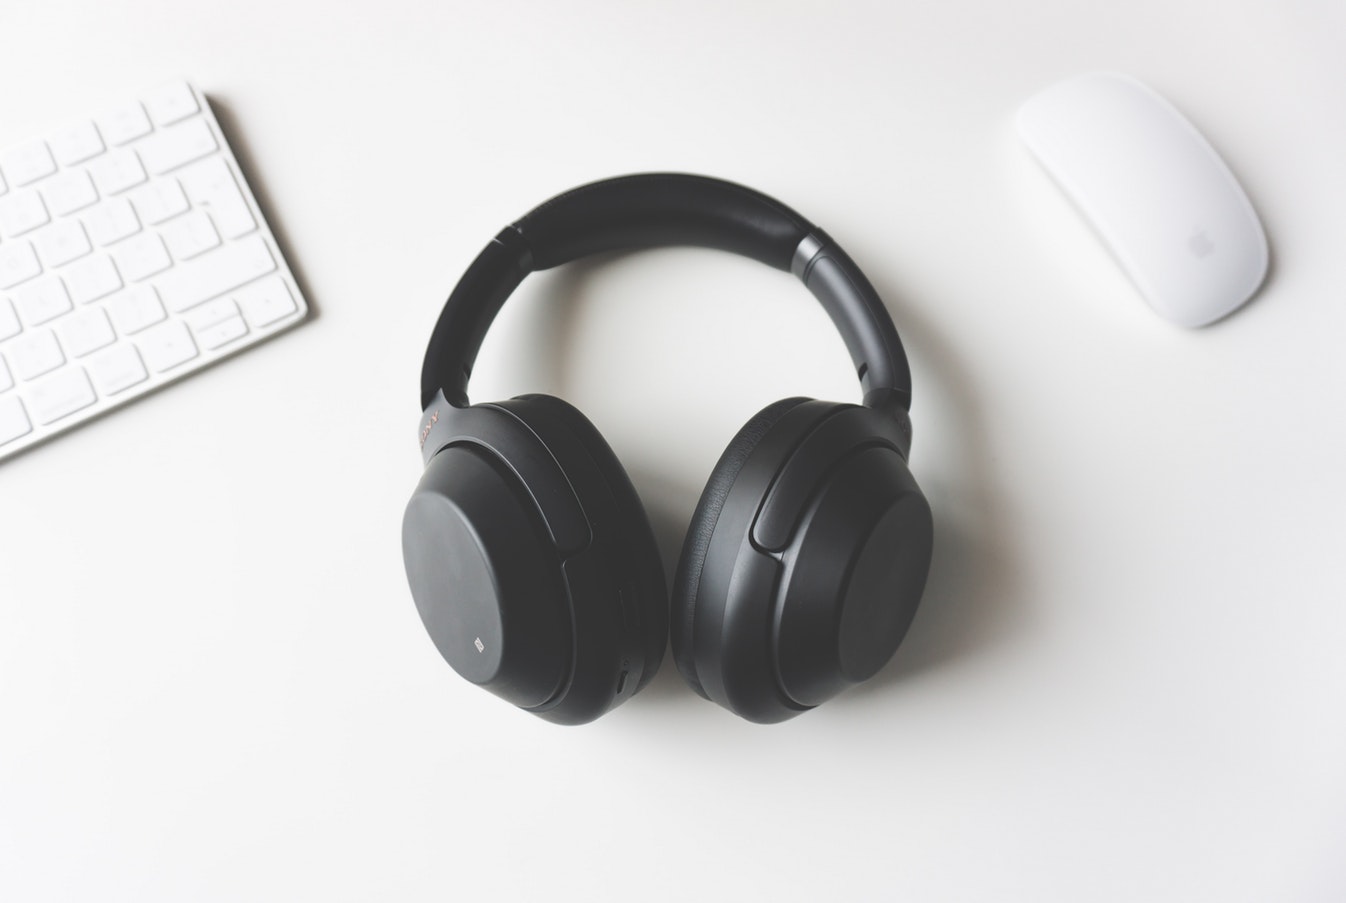 Does music really help our productivity and creativity in work?